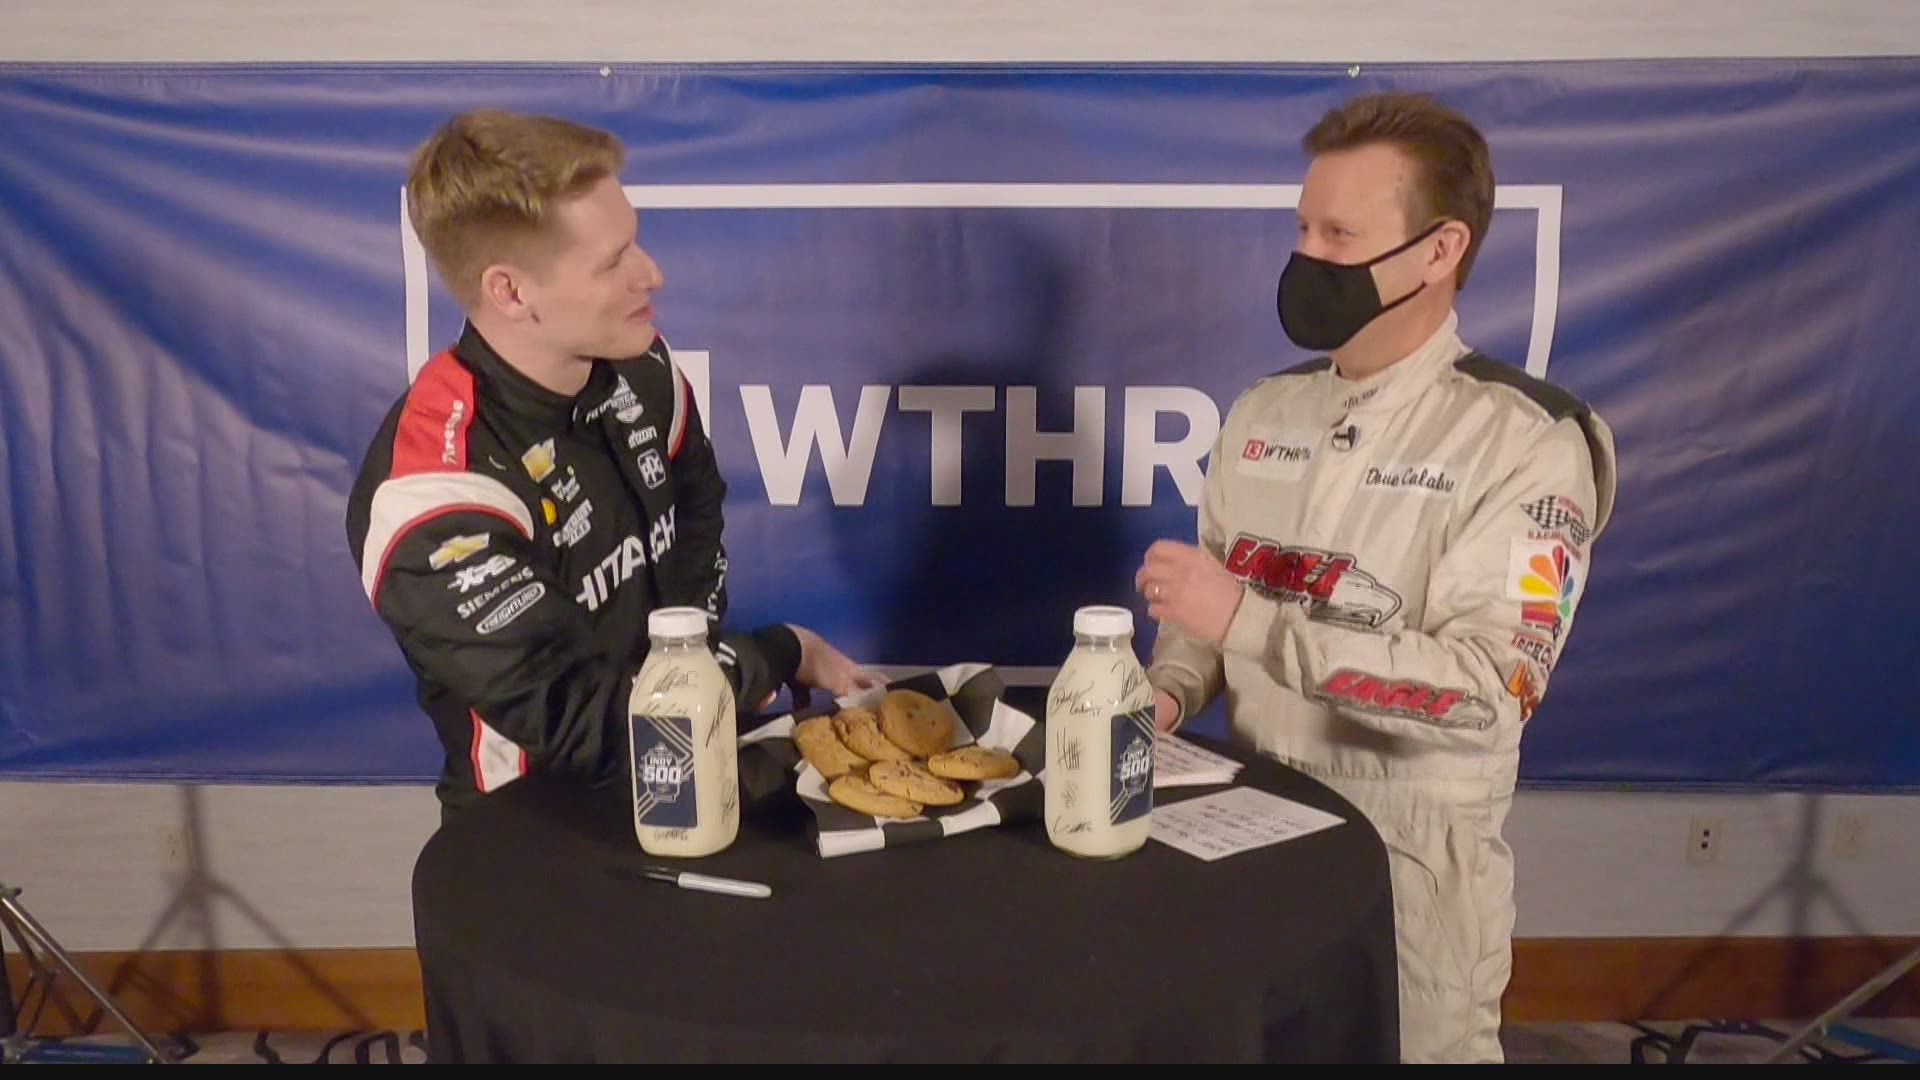 Dave Calabro talks with IndyCar drivers about the pro athlete they'd like to switch places with, their latest "binge food" and how they get ready before a race.